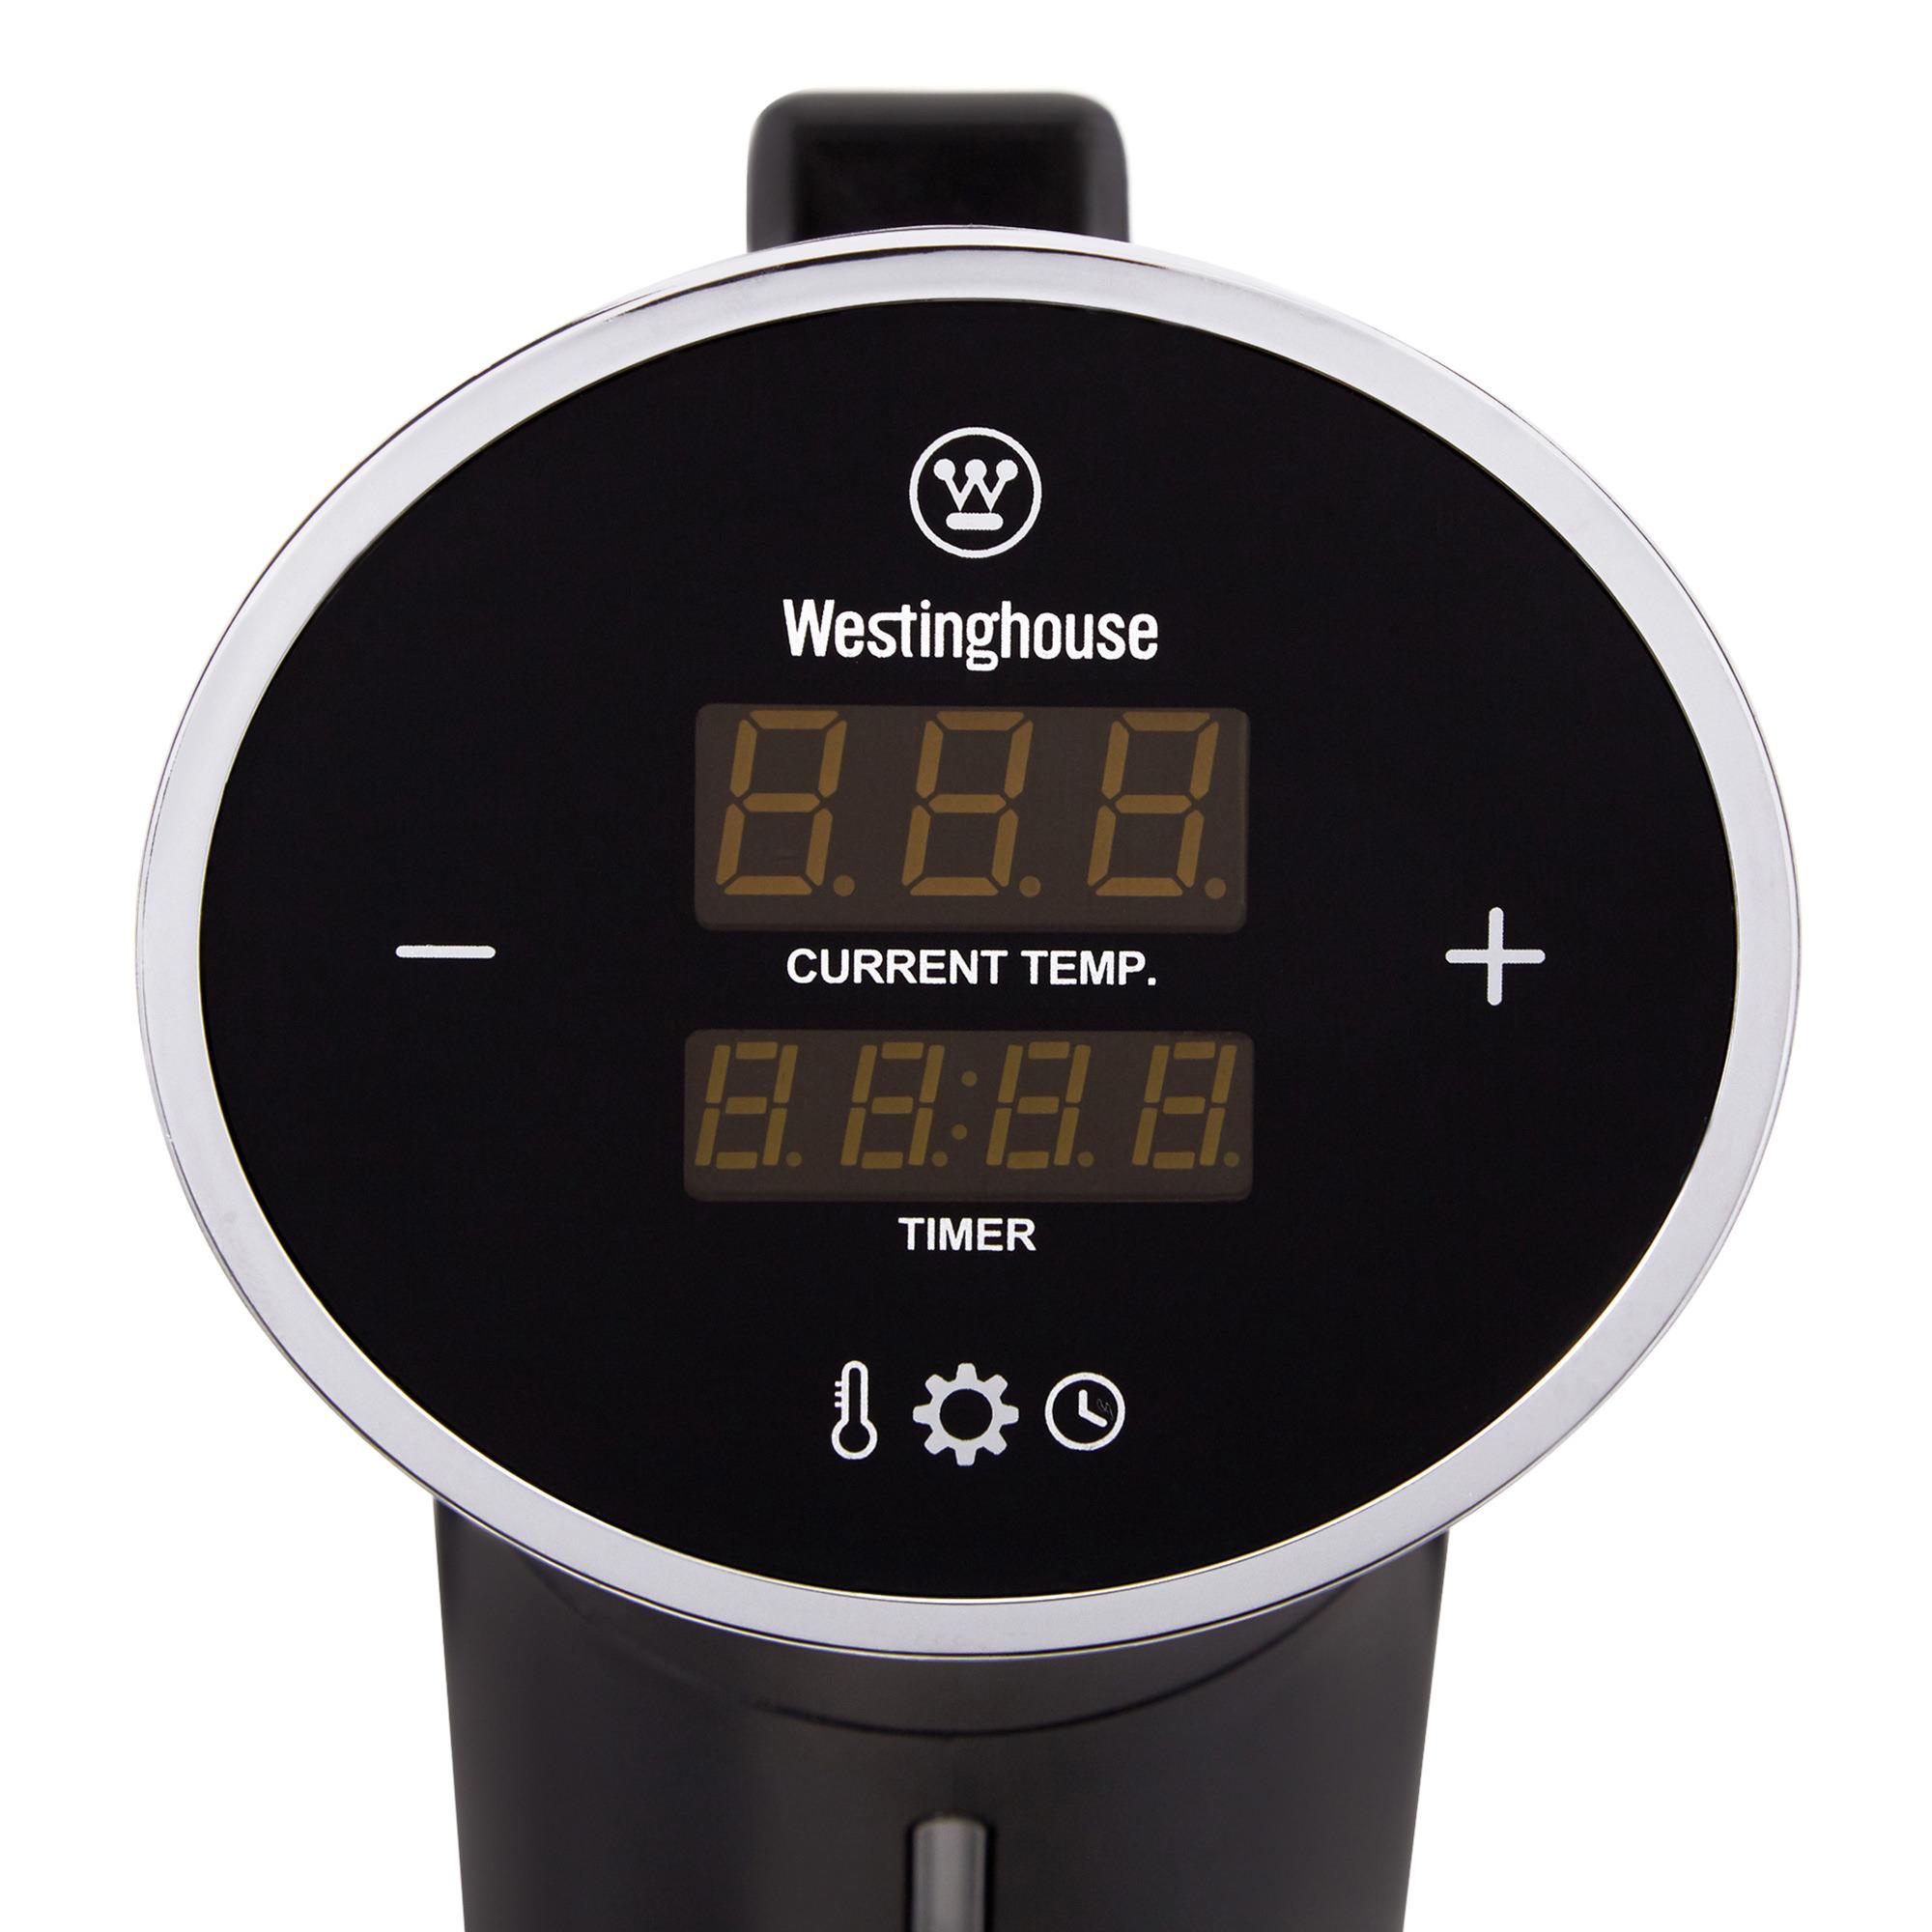 Westinghouse Sous Vide Immersion Cooker Image 4